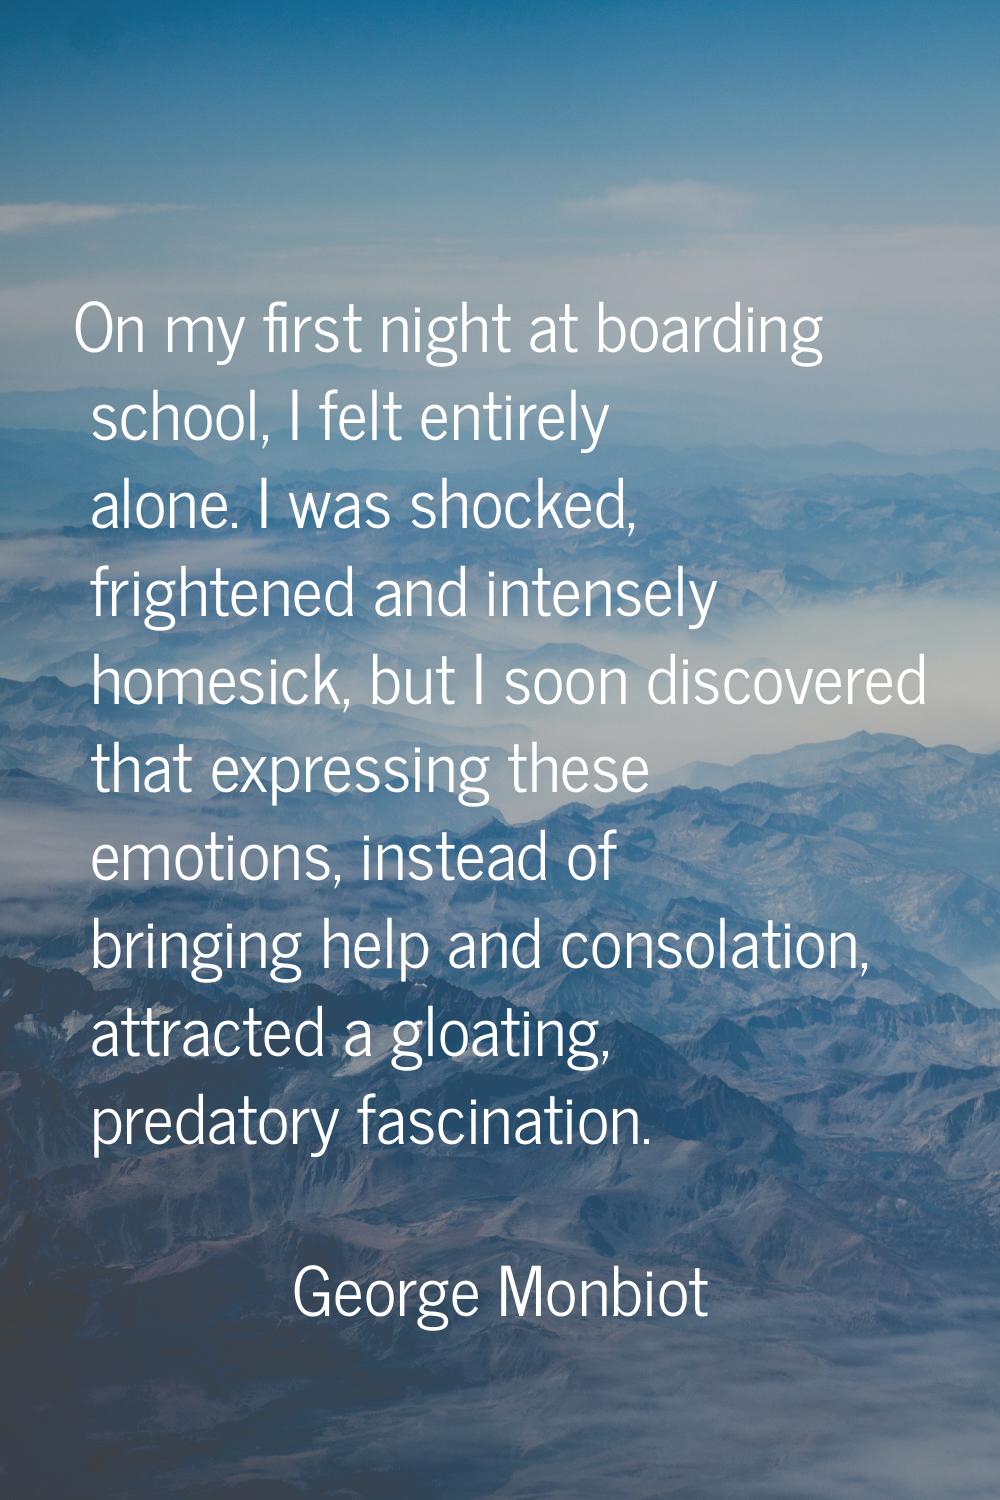 On my first night at boarding school, I felt entirely alone. I was shocked, frightened and intensel